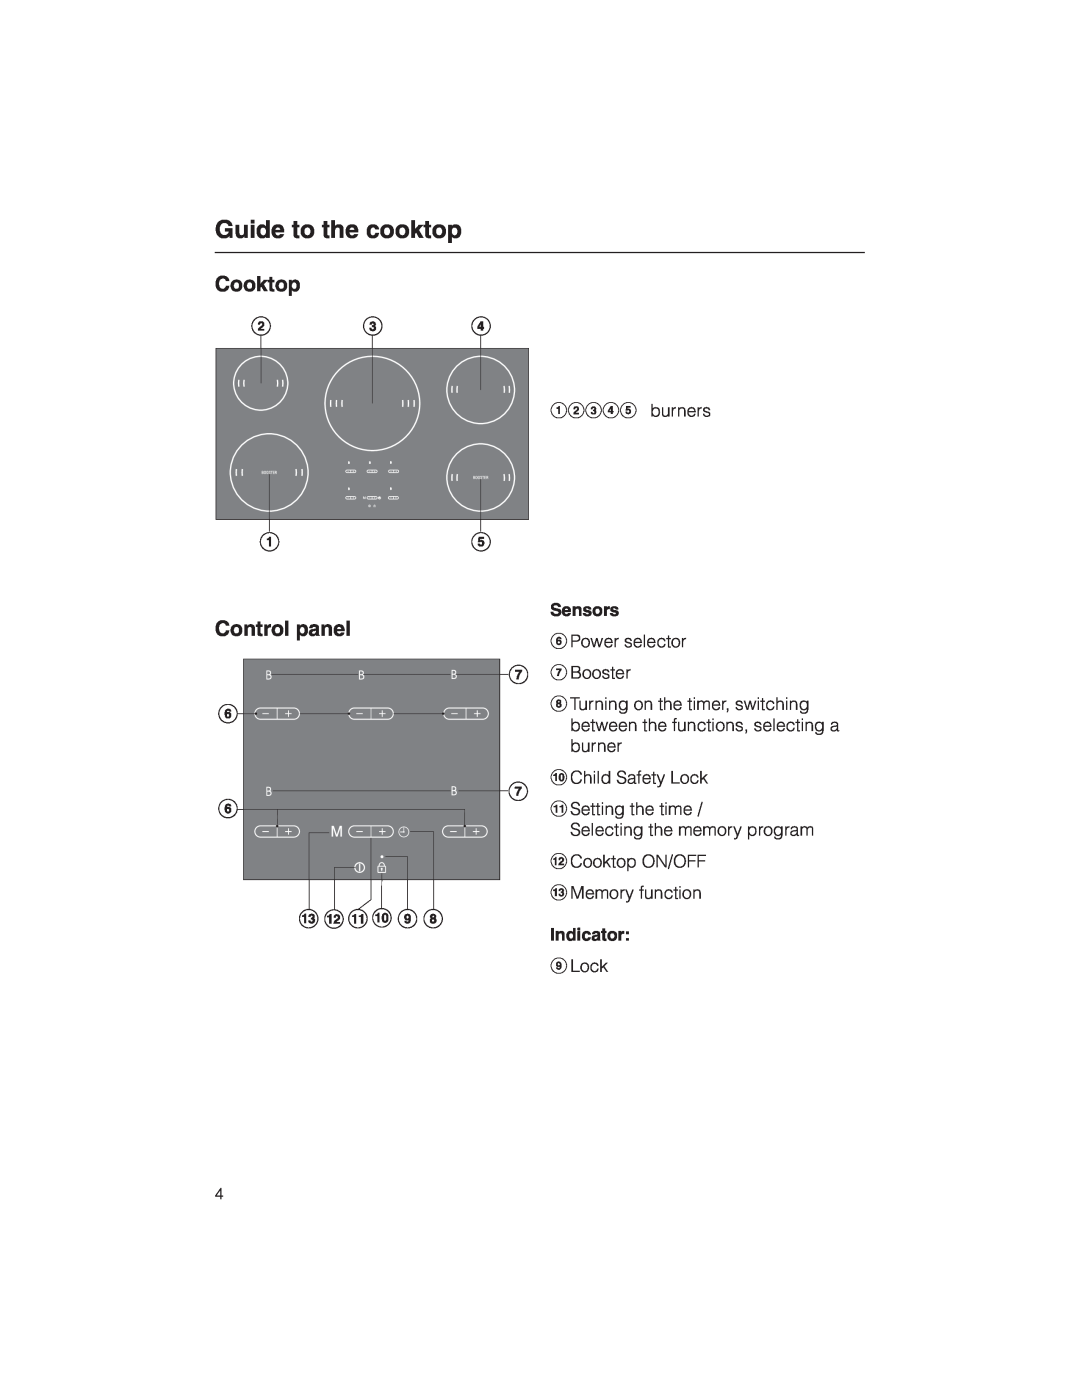 Miele KM 5773 installation instructions Guide to the cooktop, Cooktop, Control panel, Sensors, Indicator 